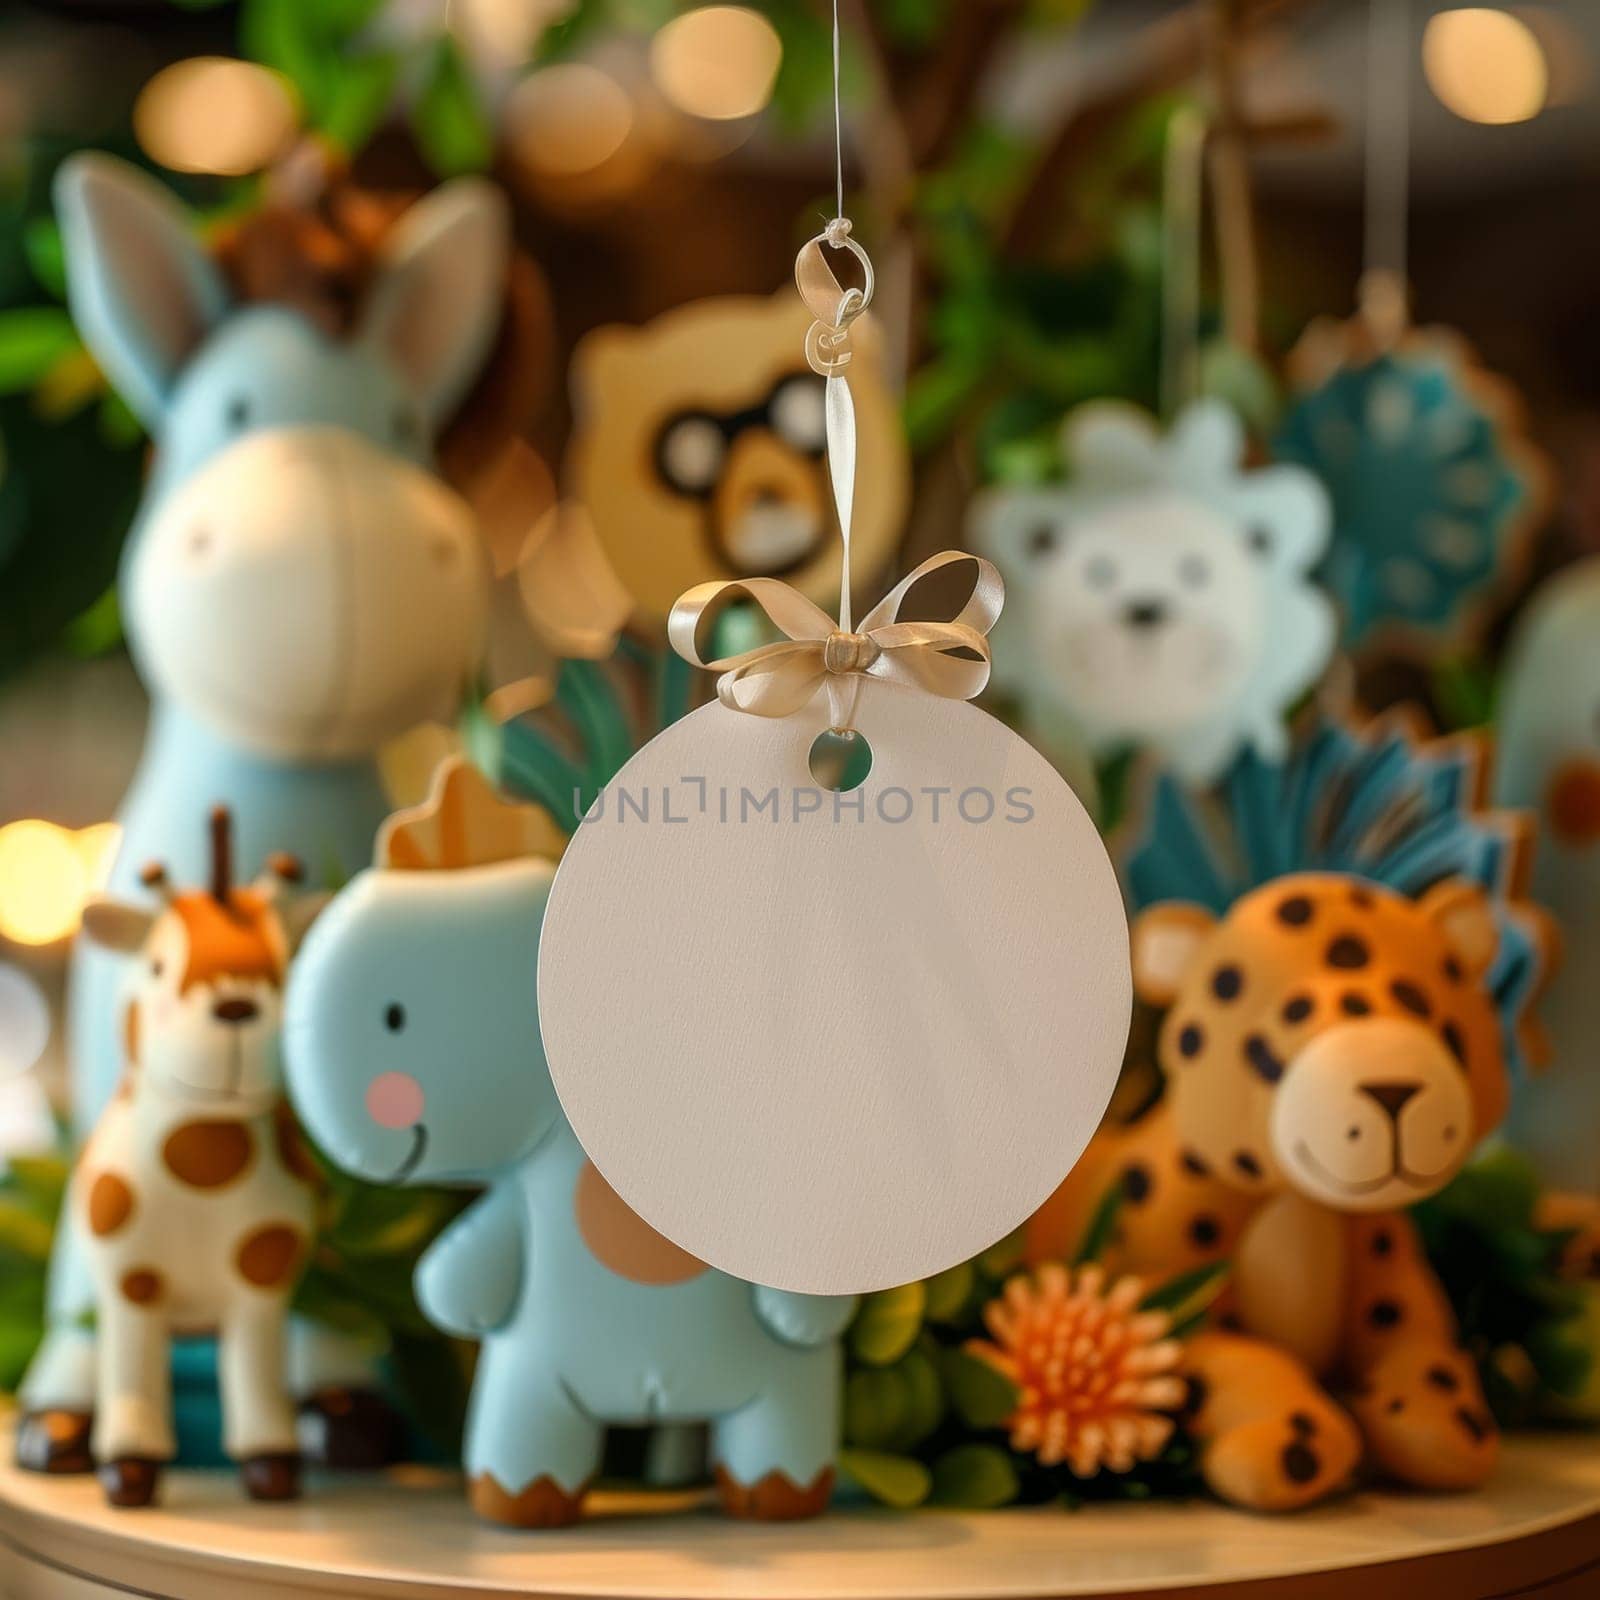 A table with a giraffe cake and other animal cakes. A white tag with the words is hanging from the cake